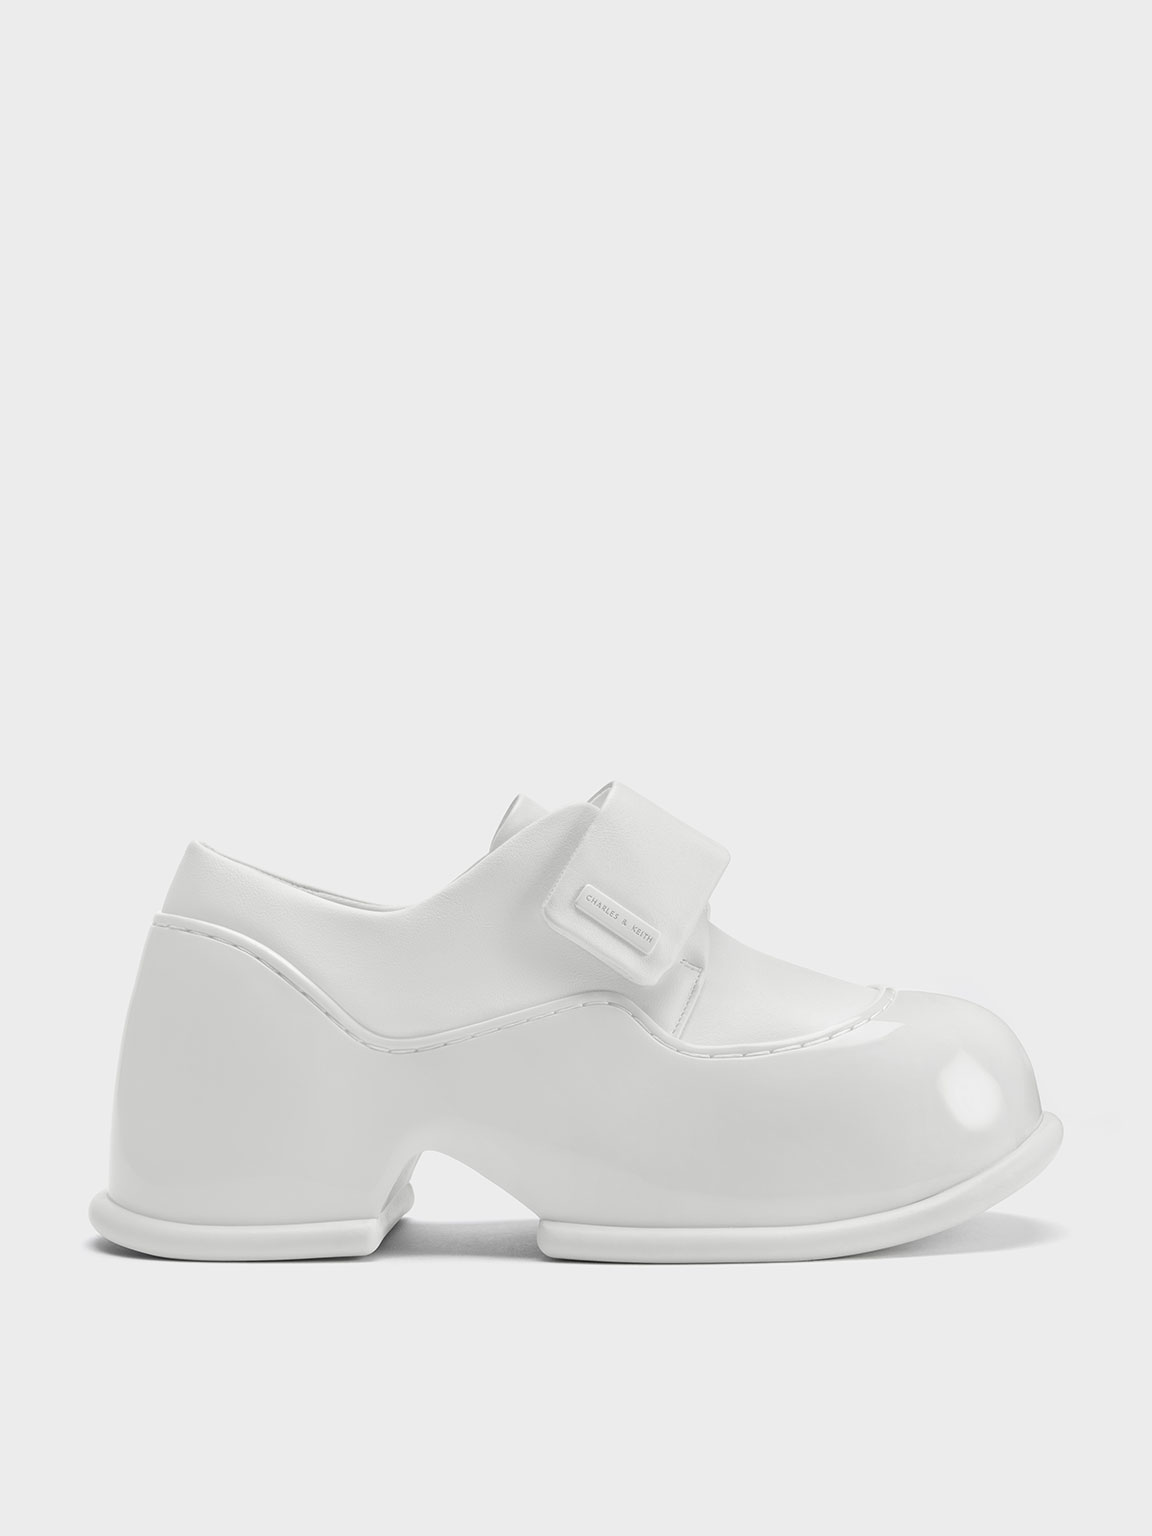 Charles & Keith Pixie Patent Platform Loafers In White